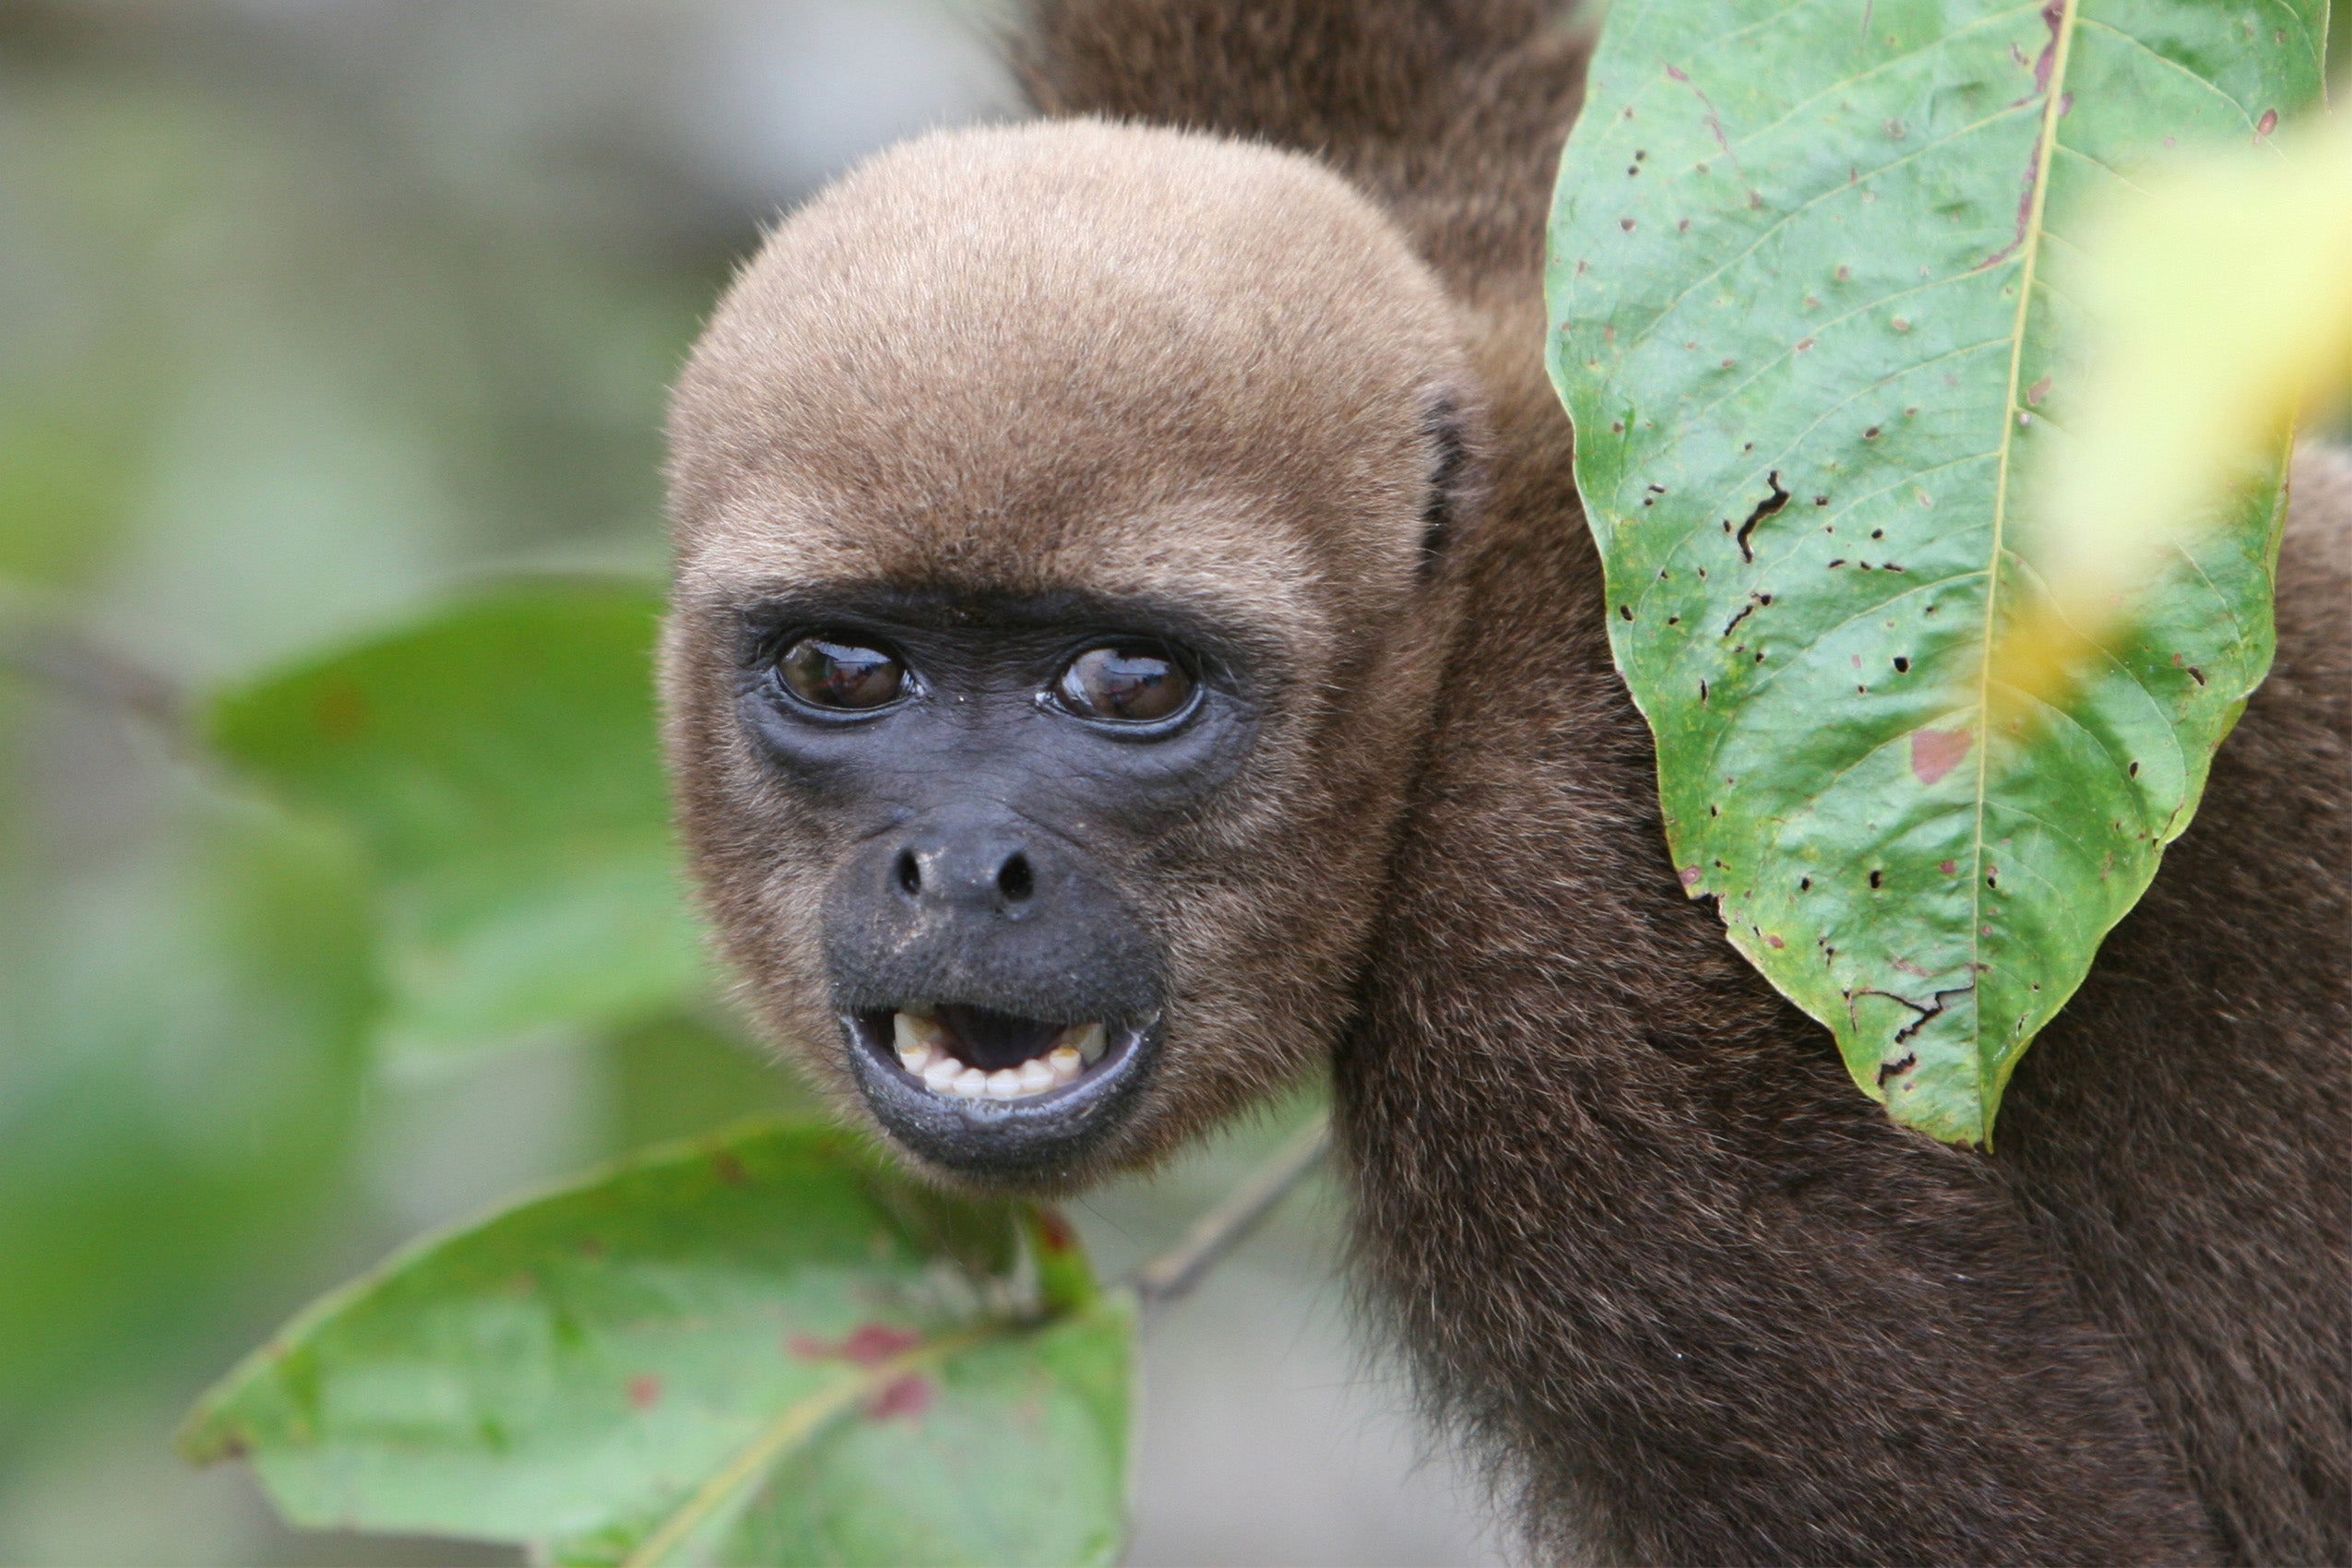 A woolly monkey in a tree along a river in the Amazon Rainforest